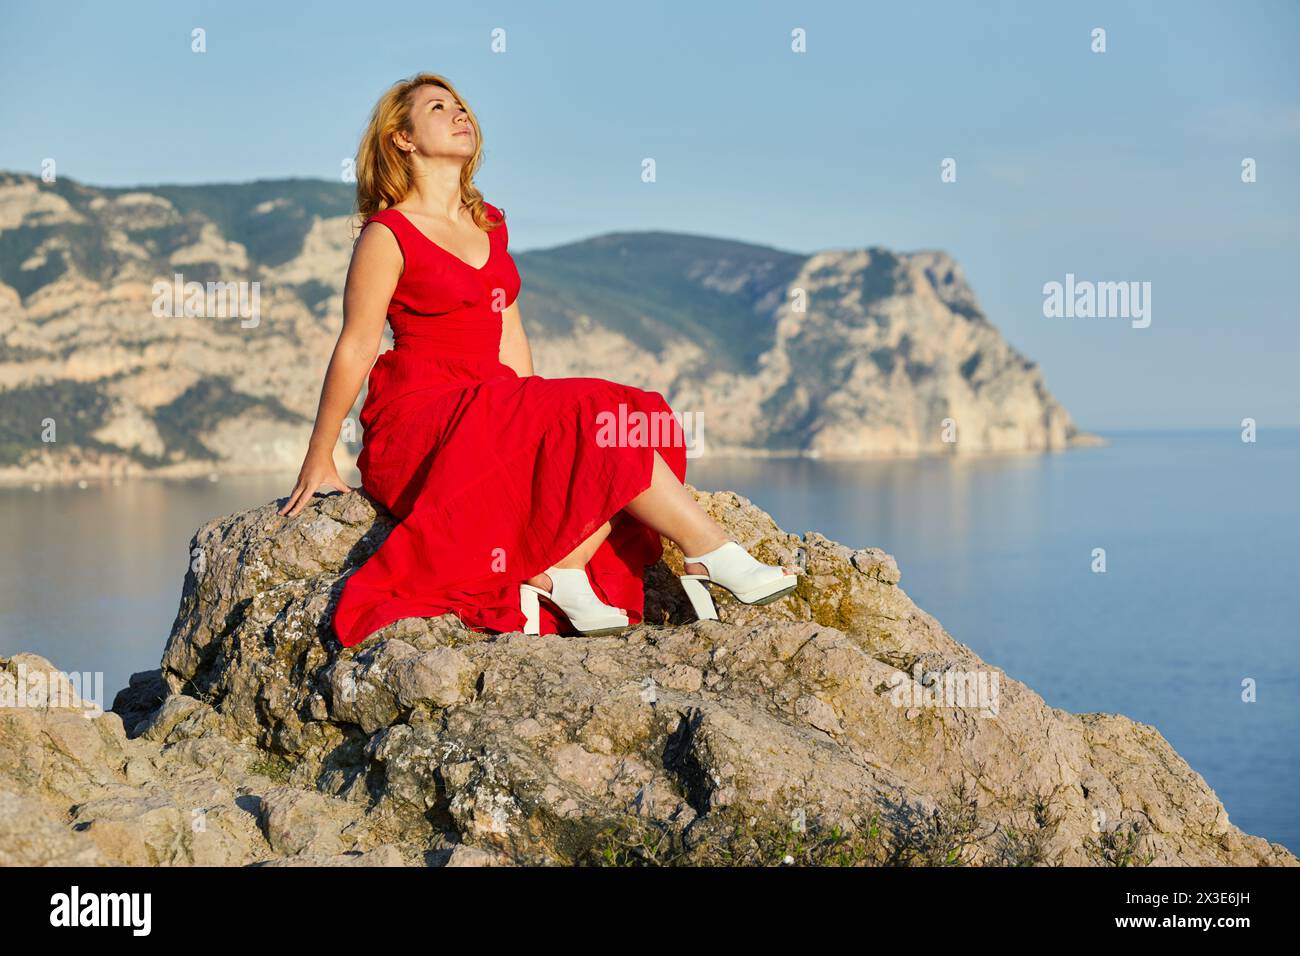 Blond woman in red dress and white high-heel shoes sits on top of rock against hills, sky and sea. Stock Photo